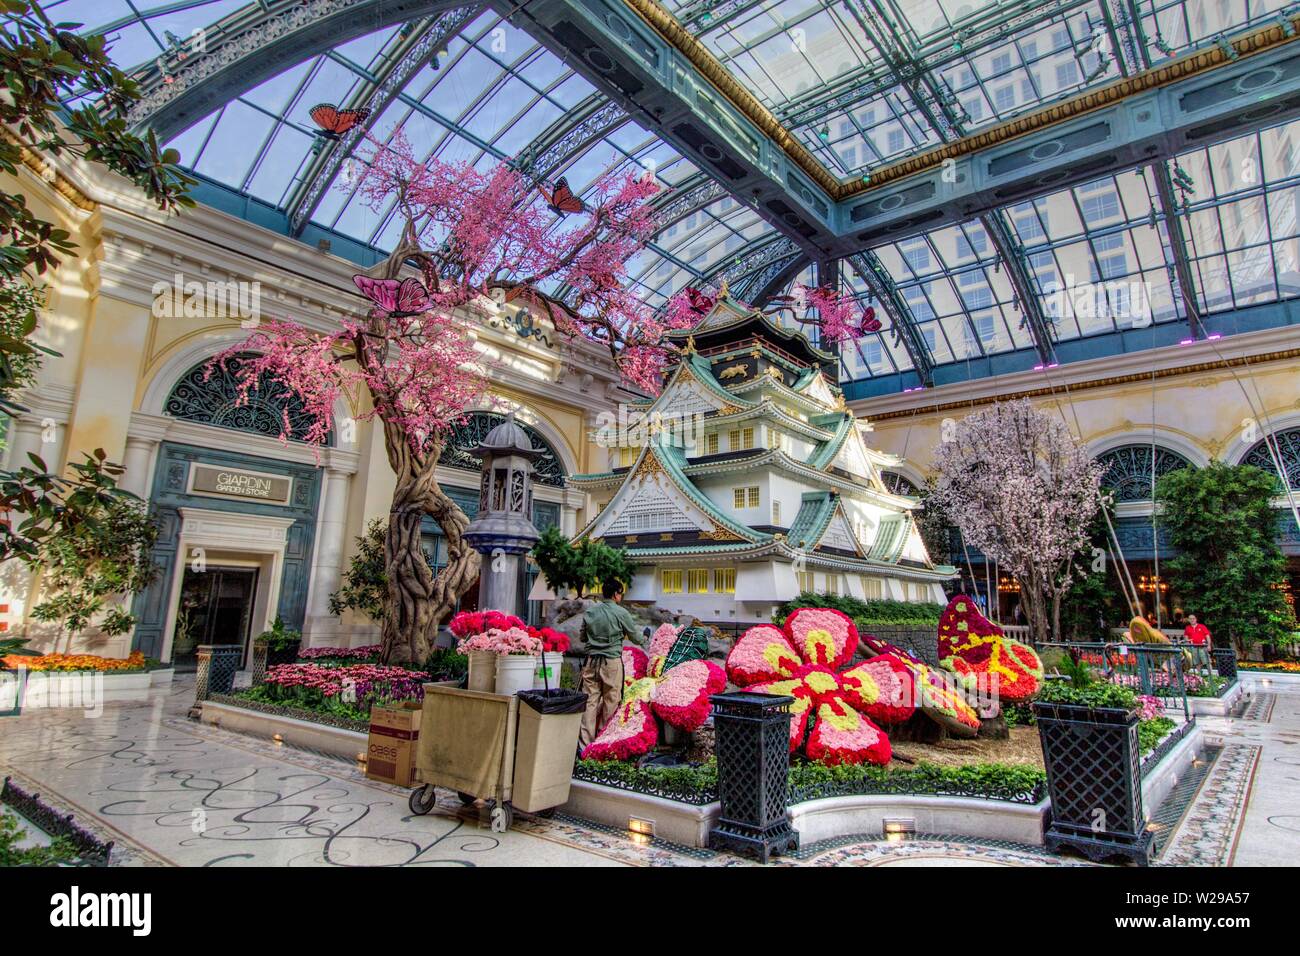 Spring floral display at the Bellagio Casino and Resort conservatory garden. The garden features seasonal floral displays that change with the seasons Stock Photo